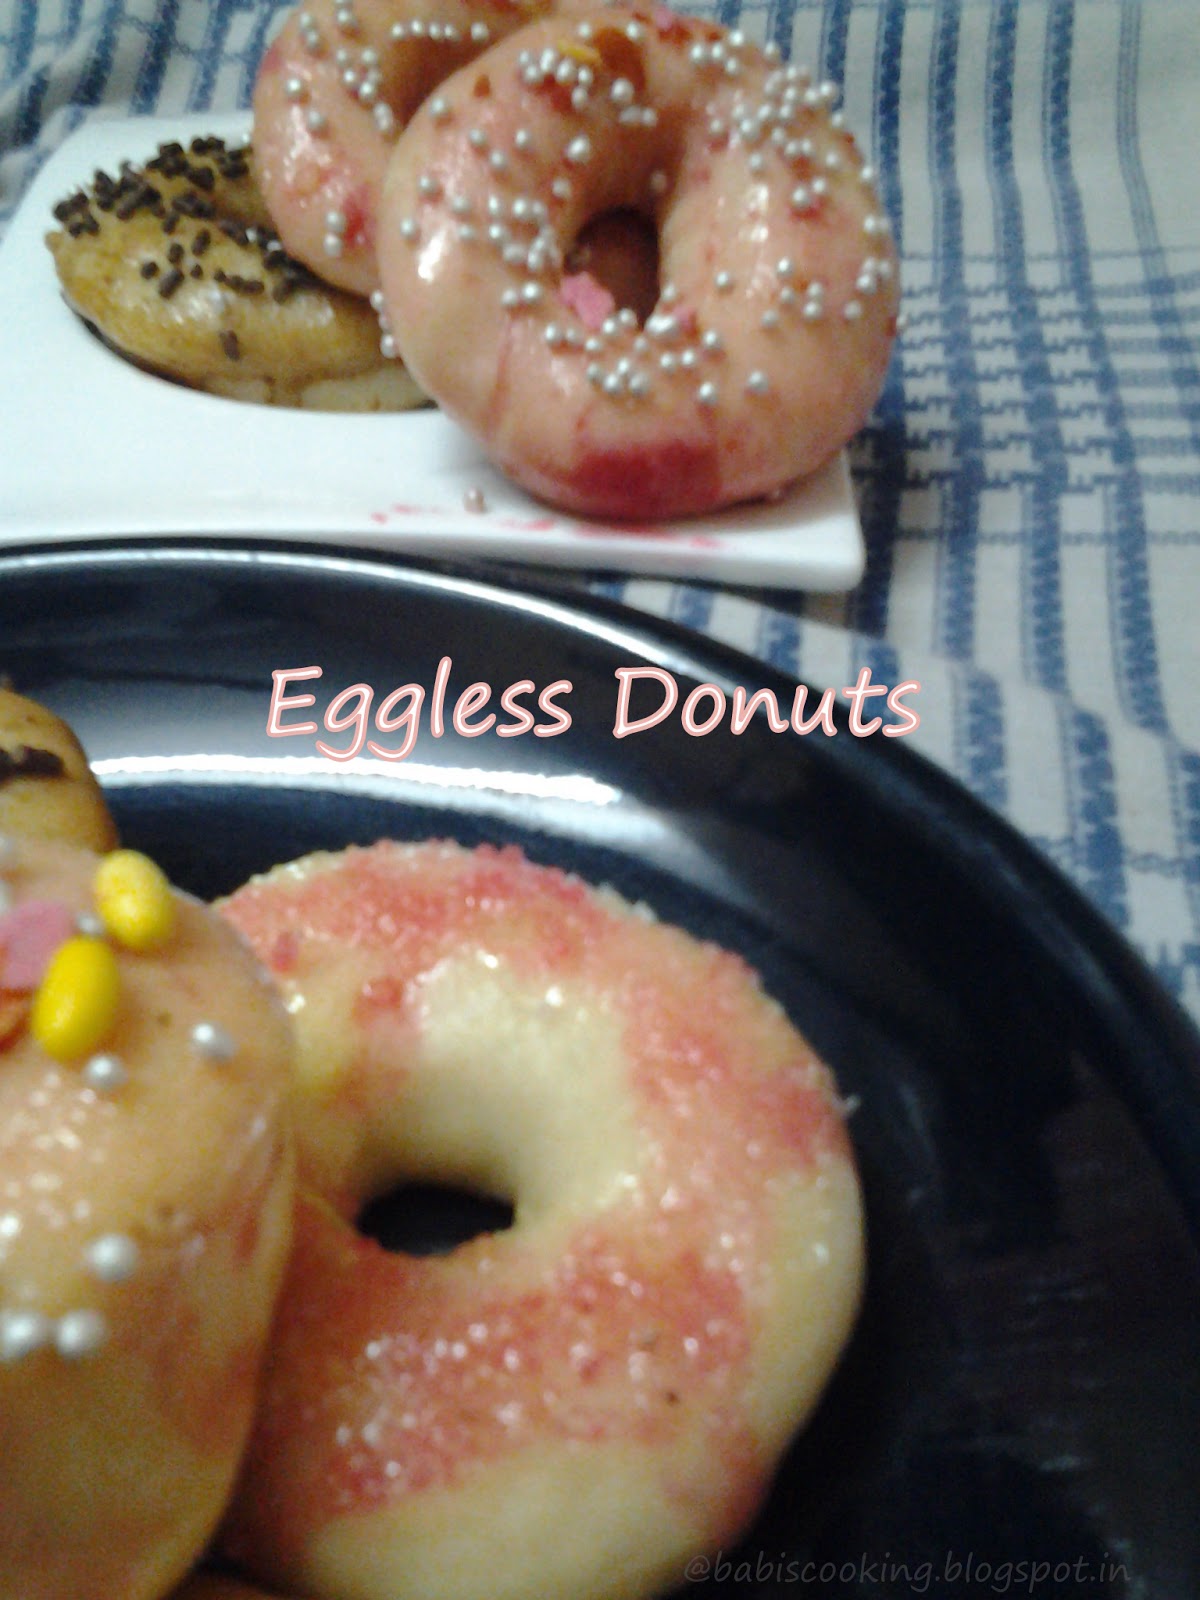 Eggless baked donuts